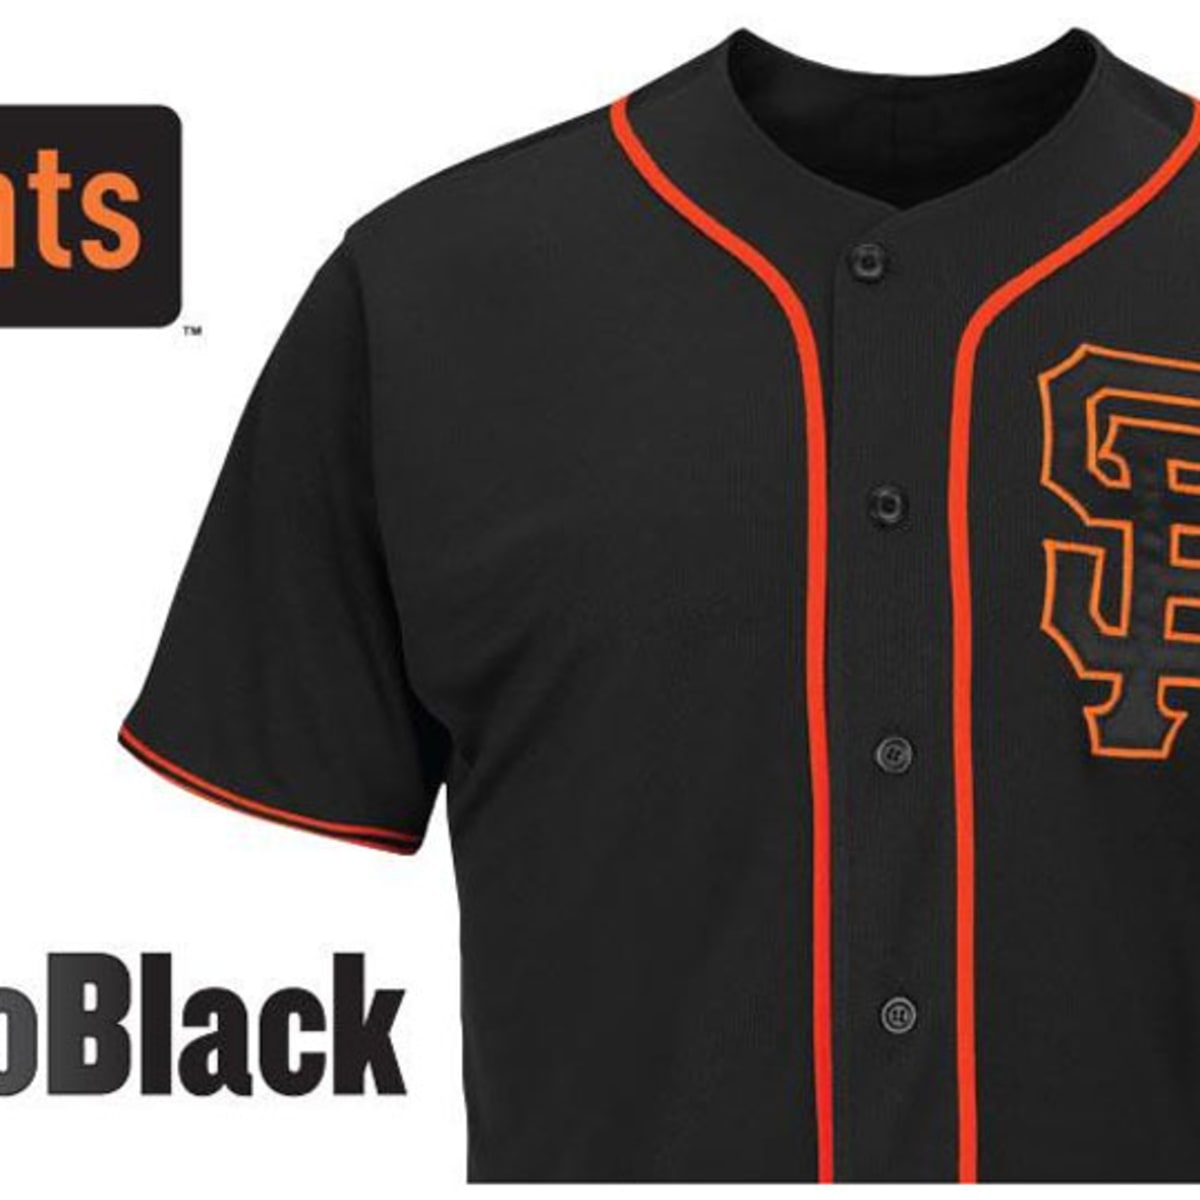 San Francisco Giants - 2018 Black Alternate Gigantes Game-Used Jersey -  Mystery Player/Coach (size 50)